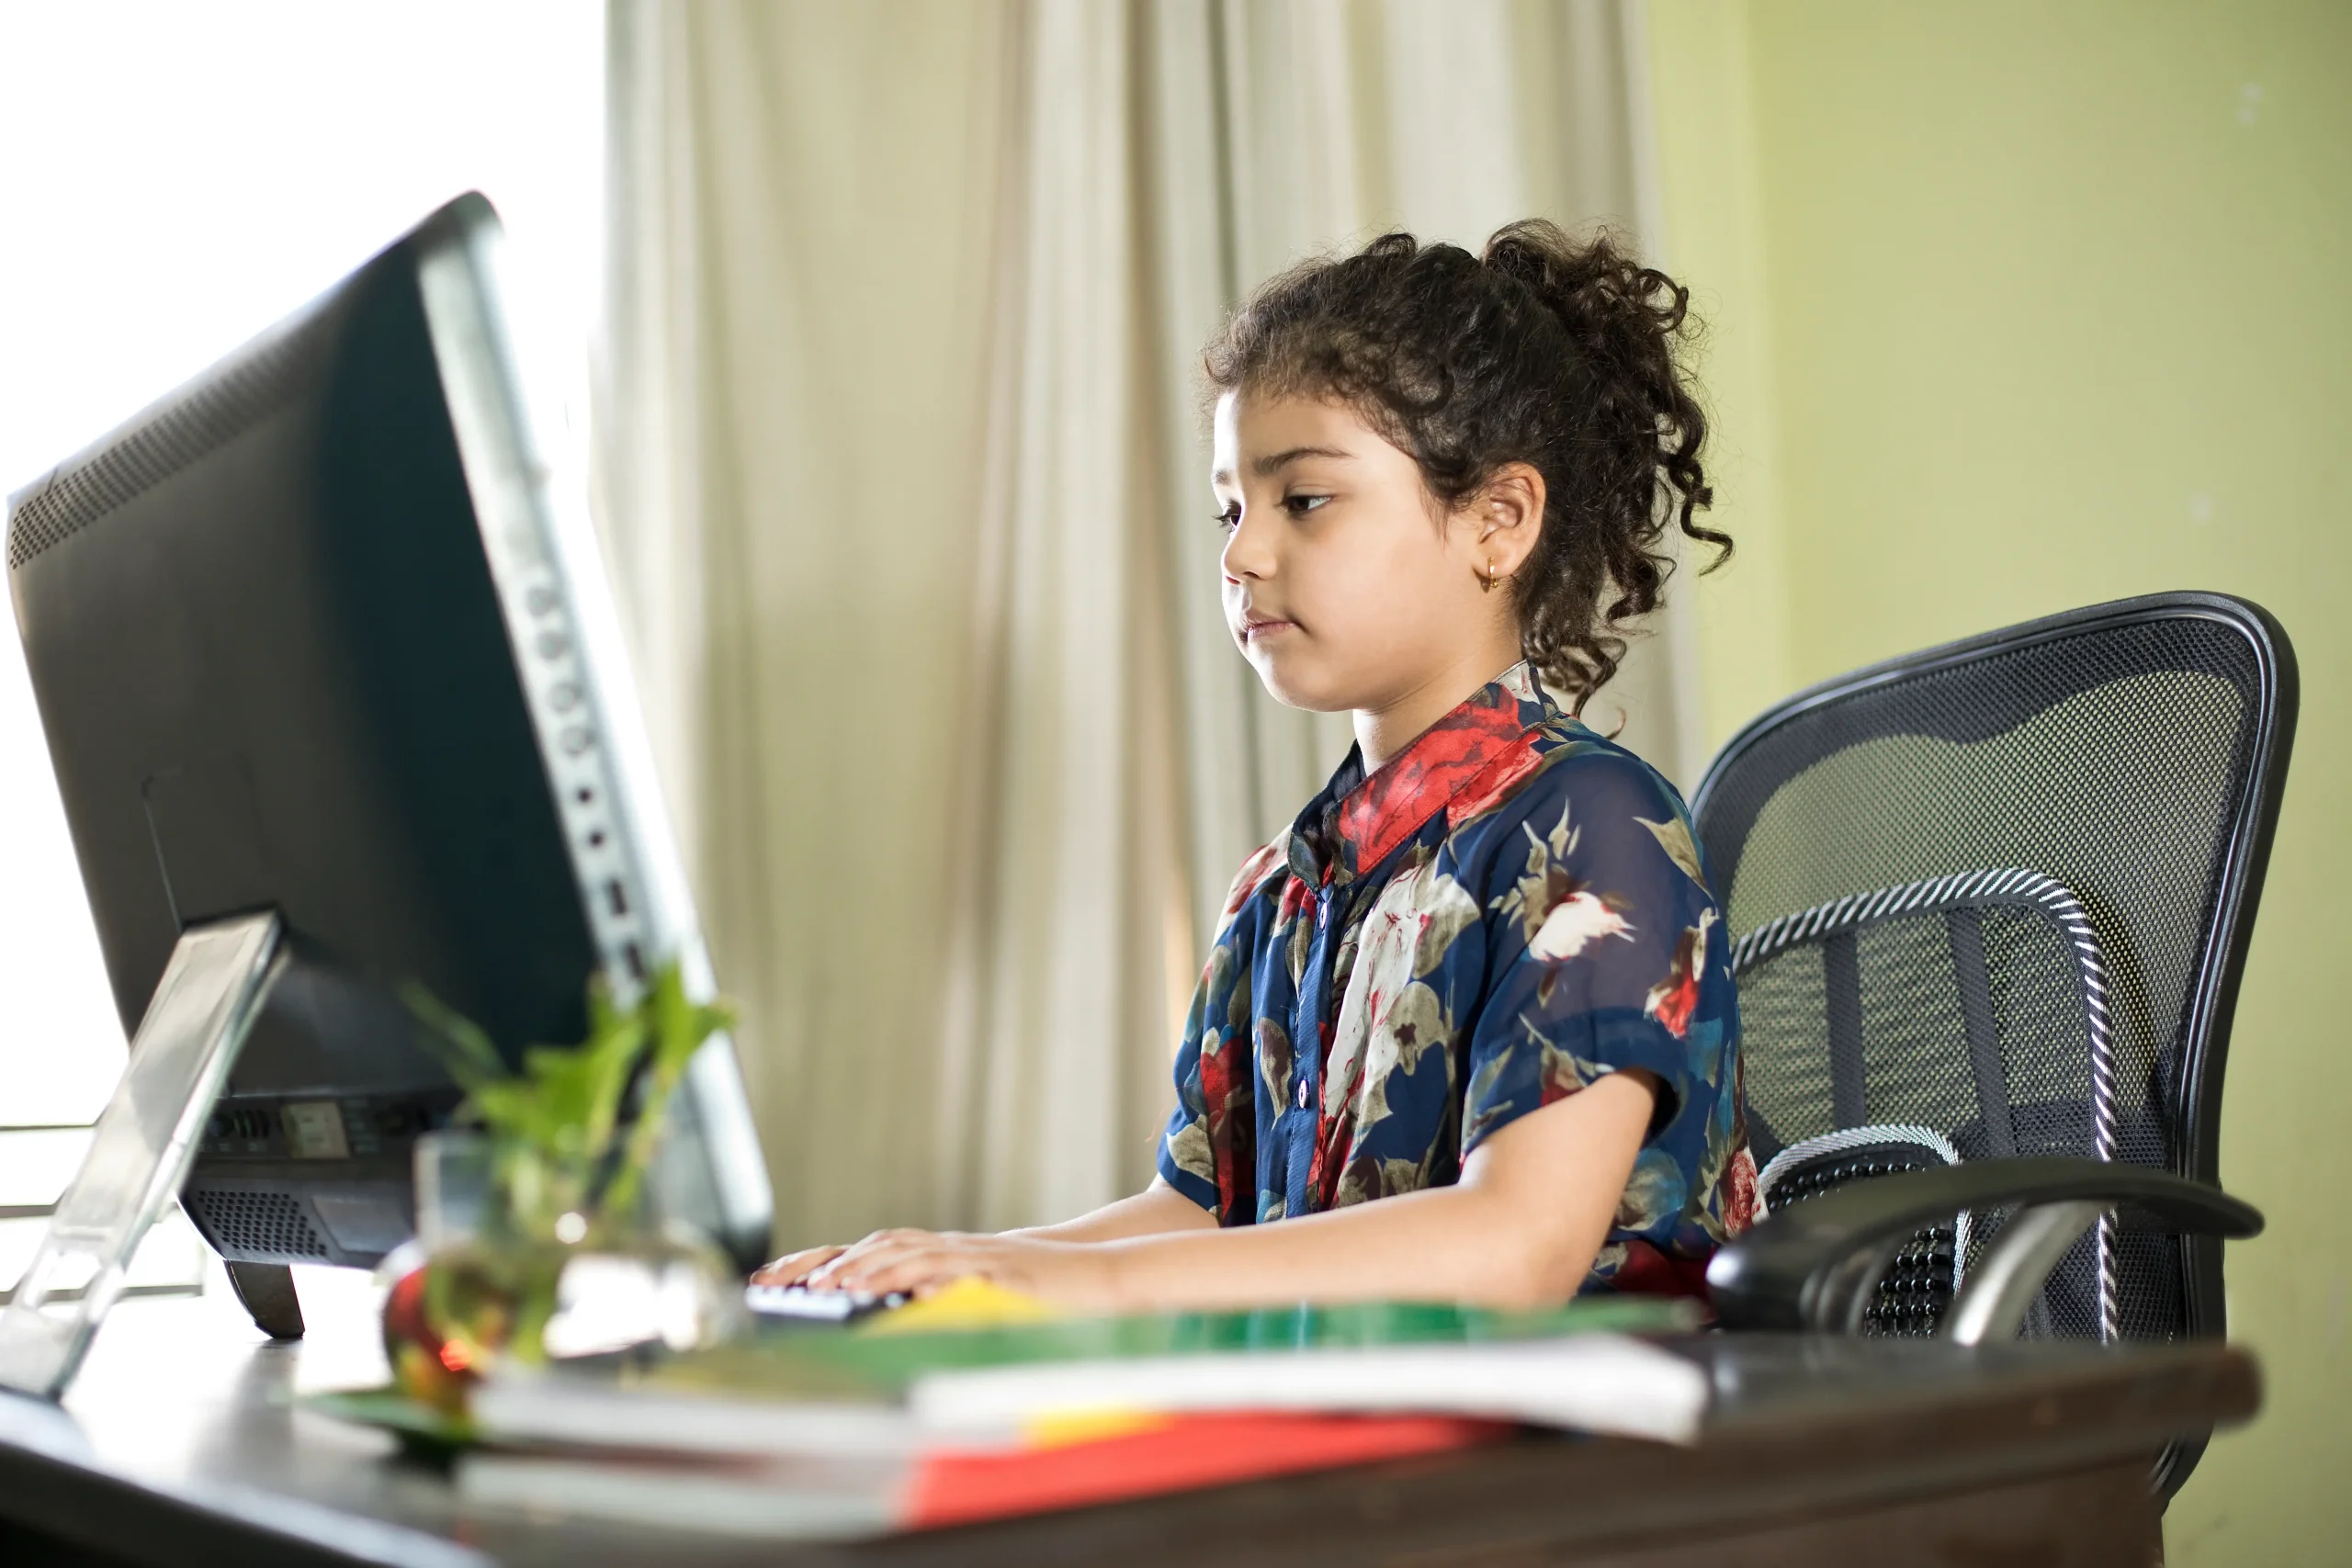 The girl is studing at home on computer